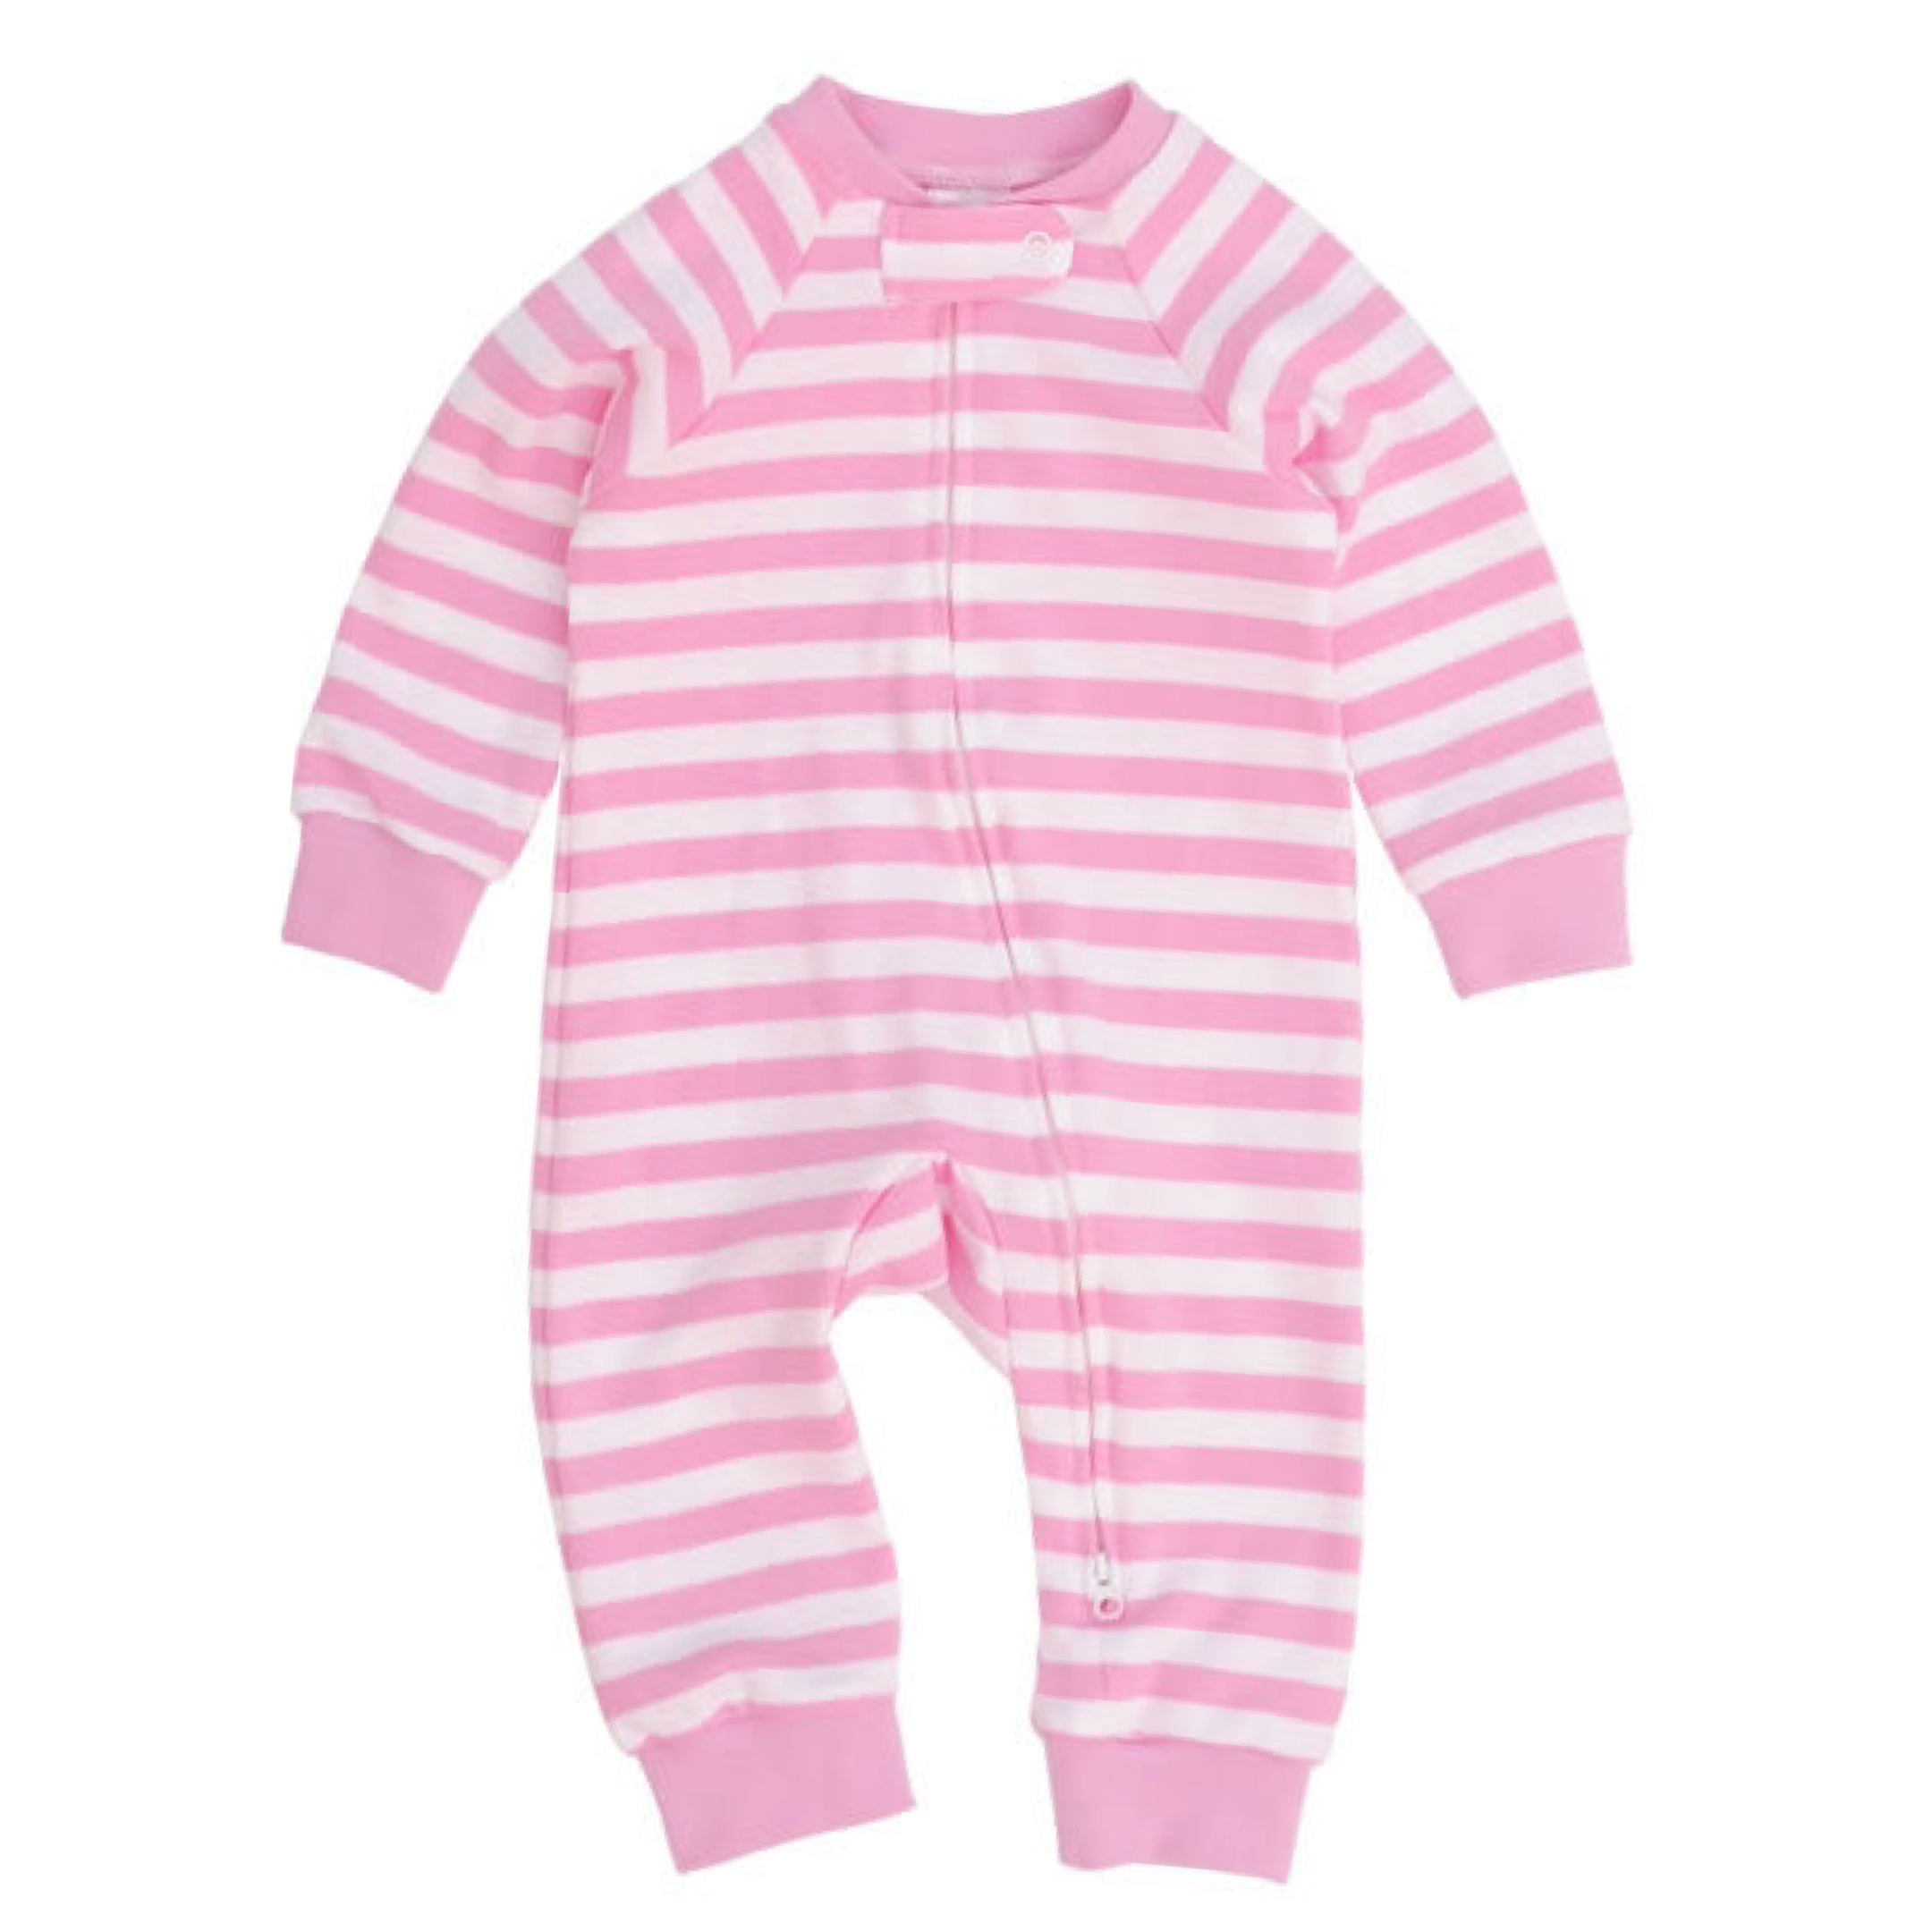 Candy Pink And White Stripe Zipped Footless Babygrow